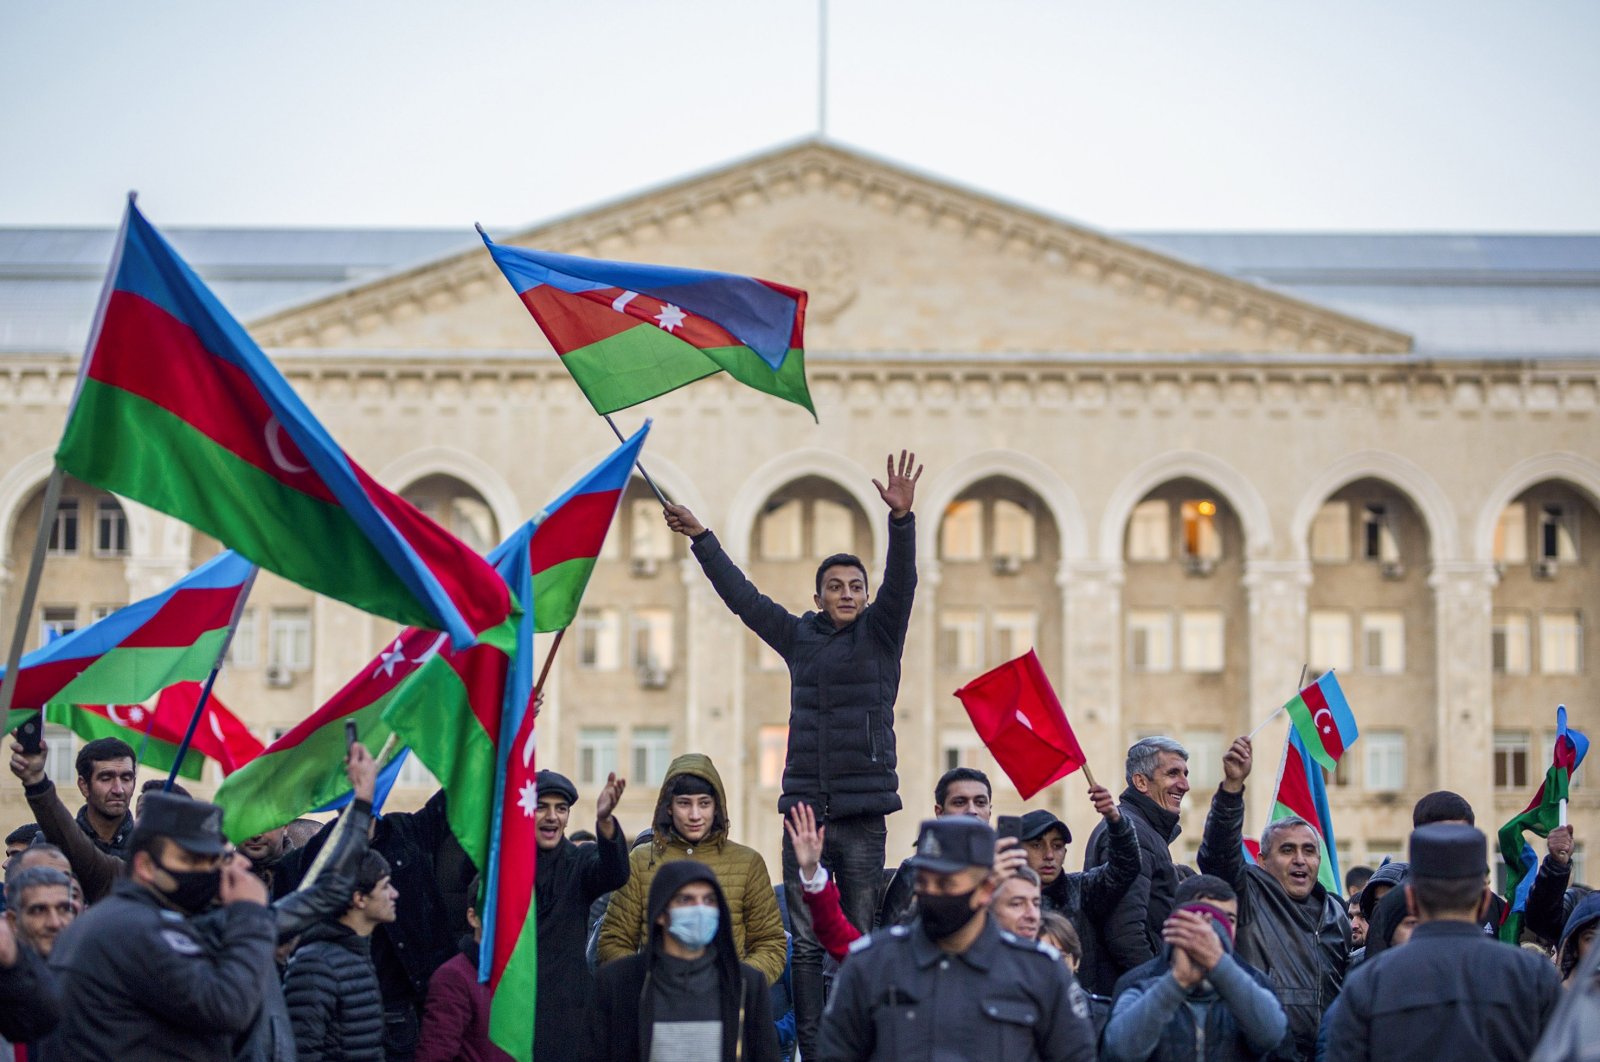 Azerbaijani citizens celebrate the peace deal that is expected to end the 30 yearlong Armenian occupation of Nagorno-Karabakh on Tuesday, Nov. 10, 2020 (AA Photo)